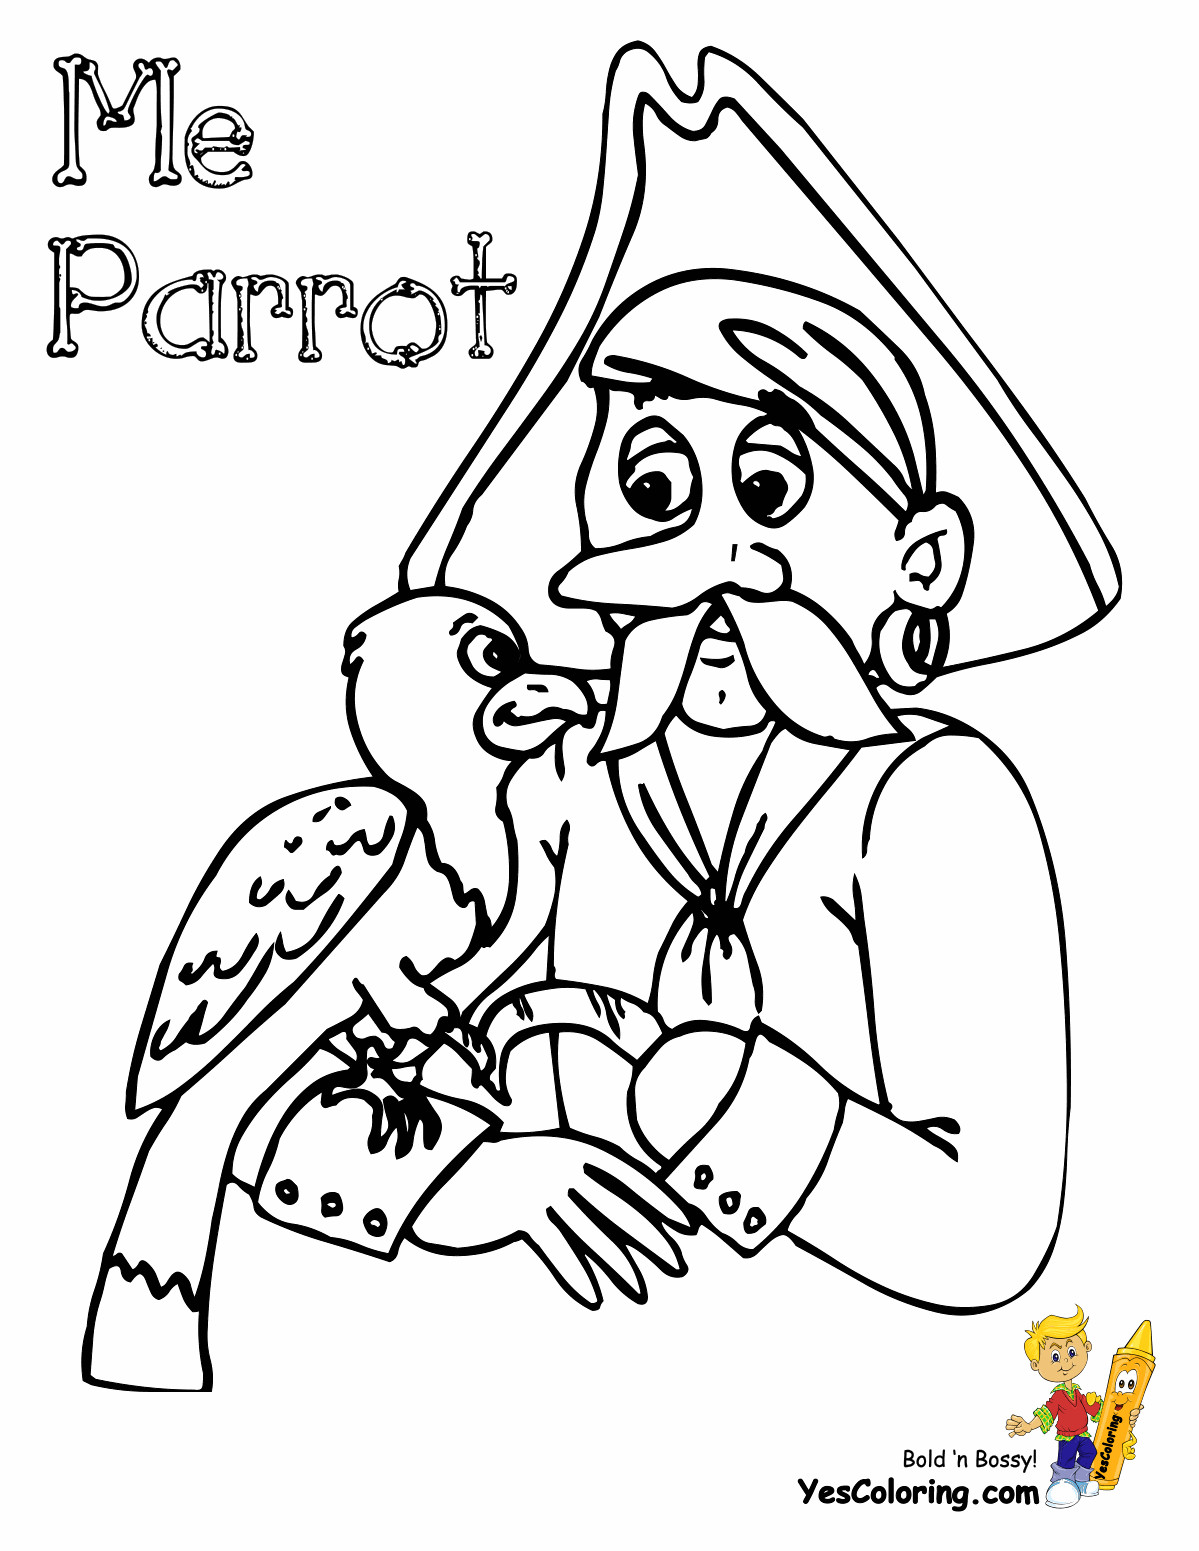 Pirate Coloring Pages Kids
 Scurvy Pirate Coloring Pages Pirate Costume